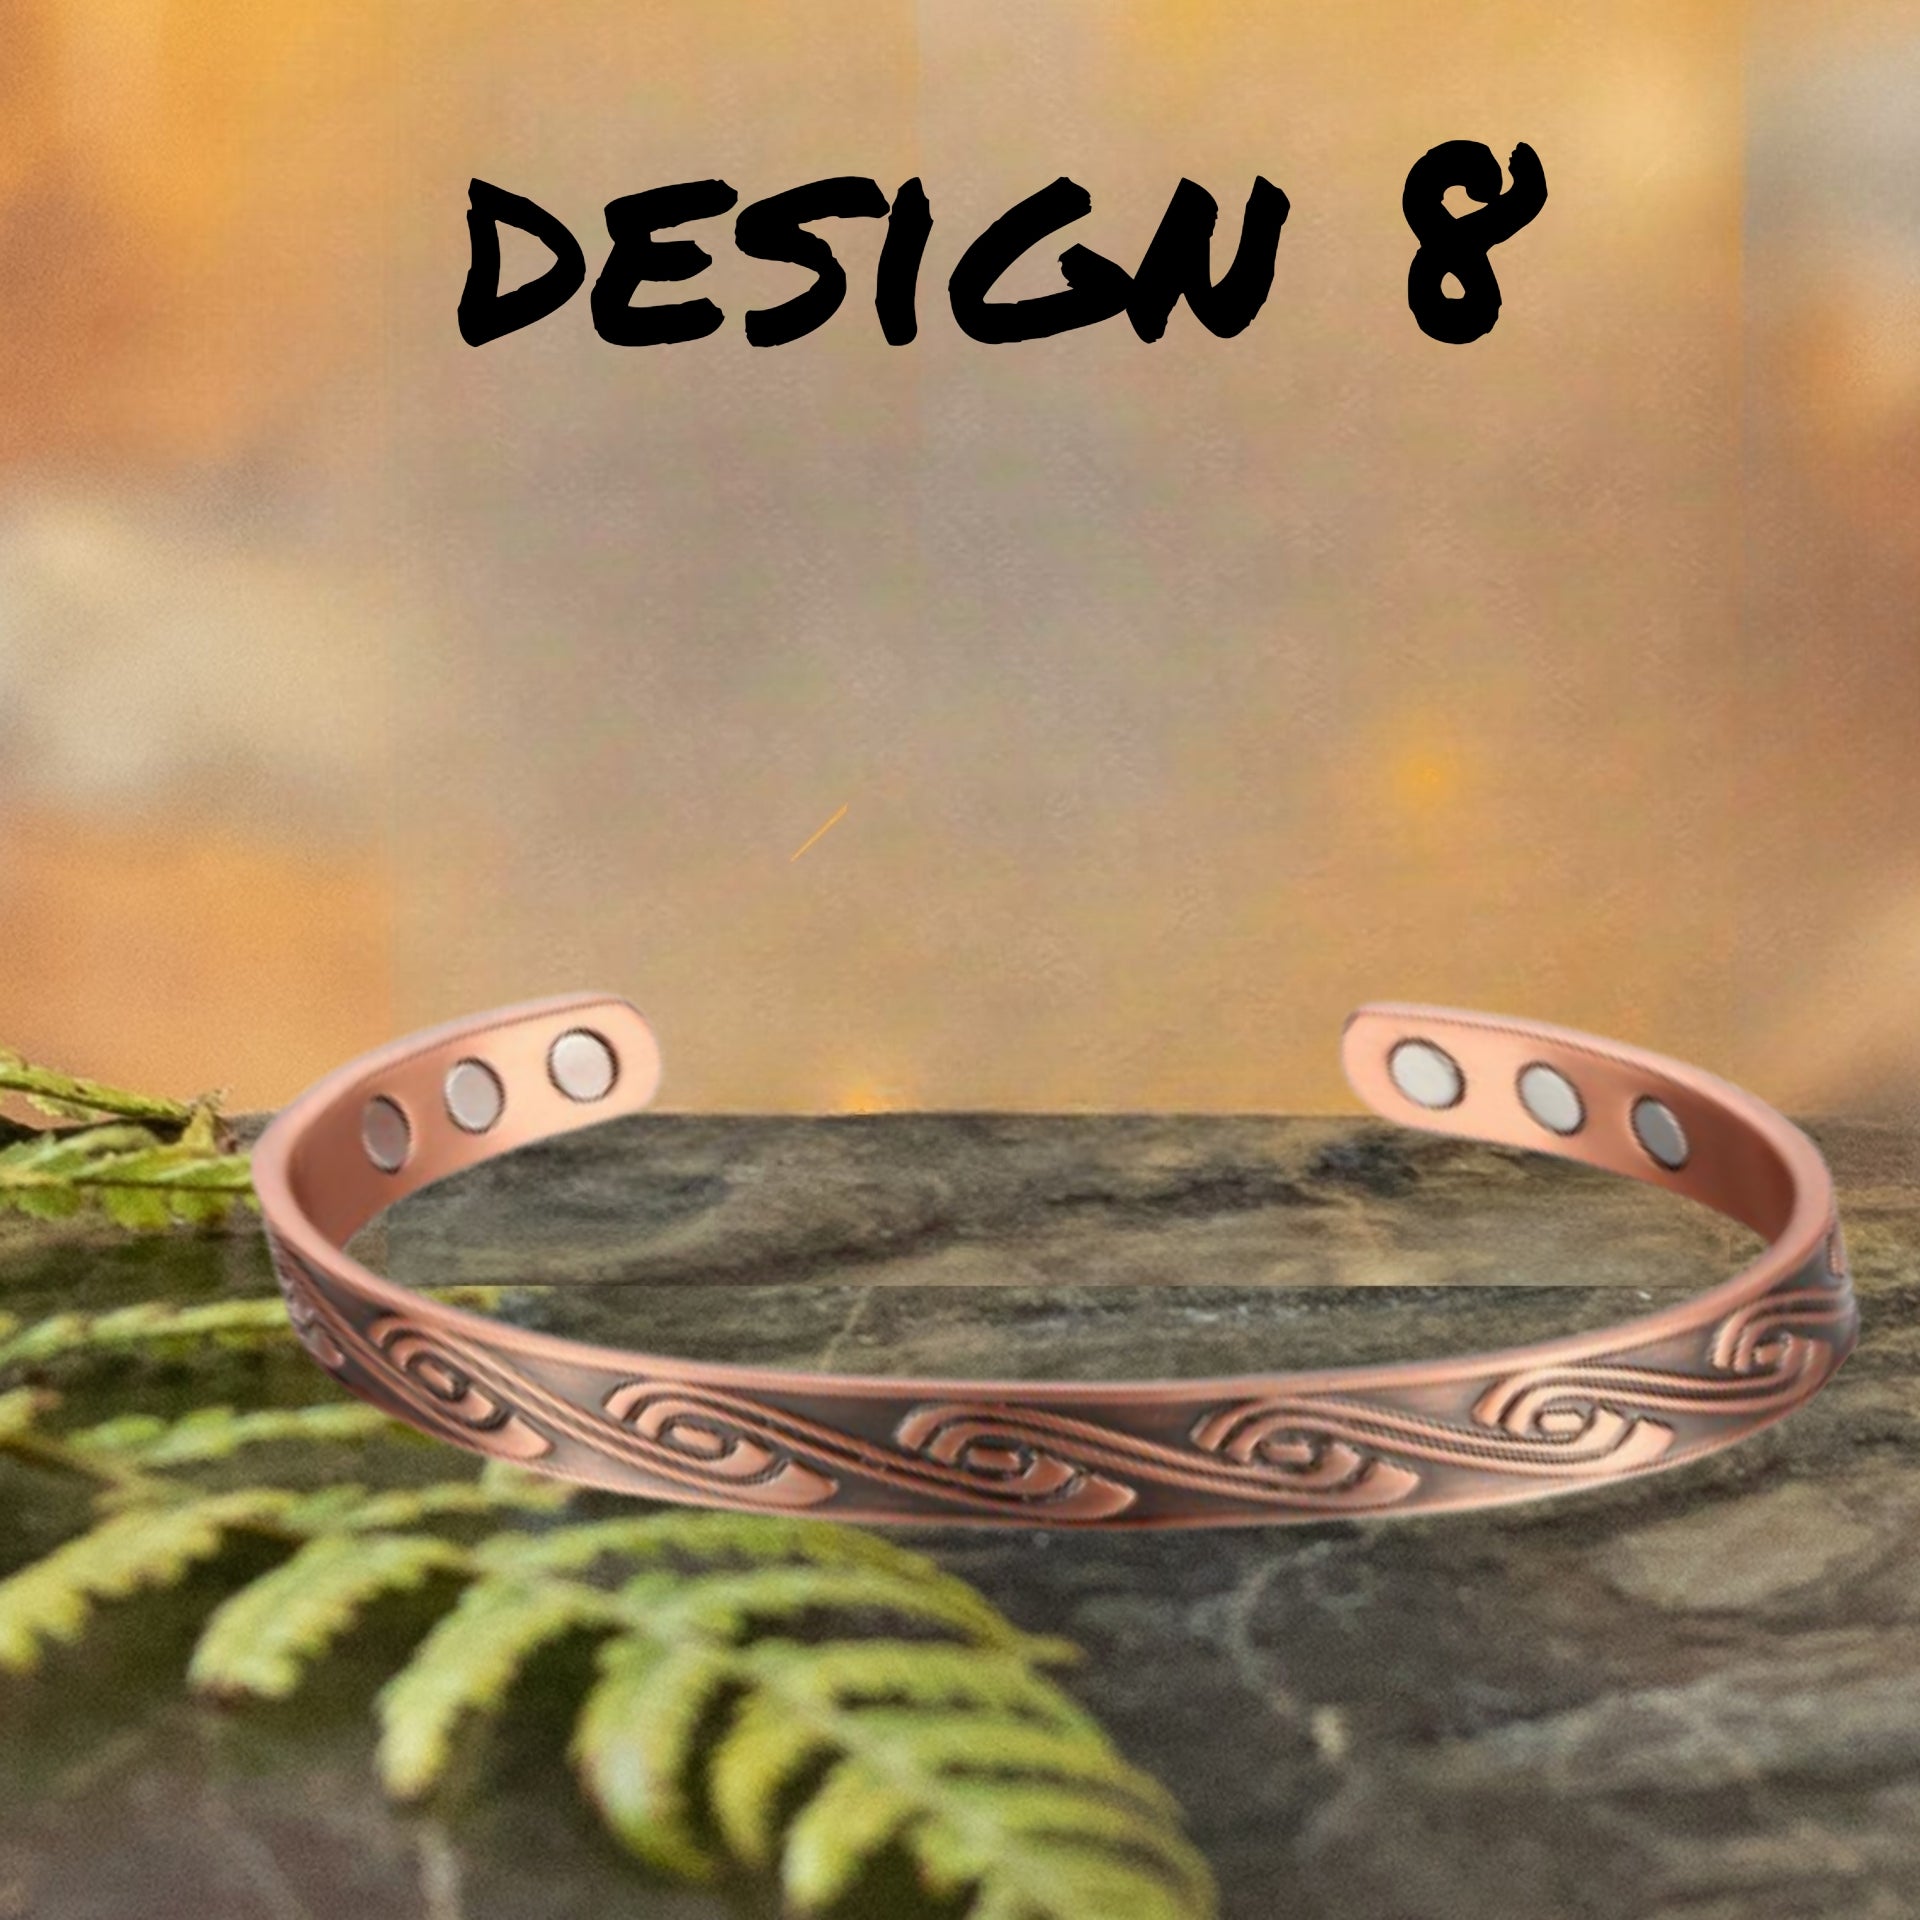 Copper Bracelet For Men Women, Magnetic Bracelets For Men With 3500 Gauss  Magnets, Copper Jewelry Adjustable Cuff Bangle For Christmas Gift | SHEIN  ASIA